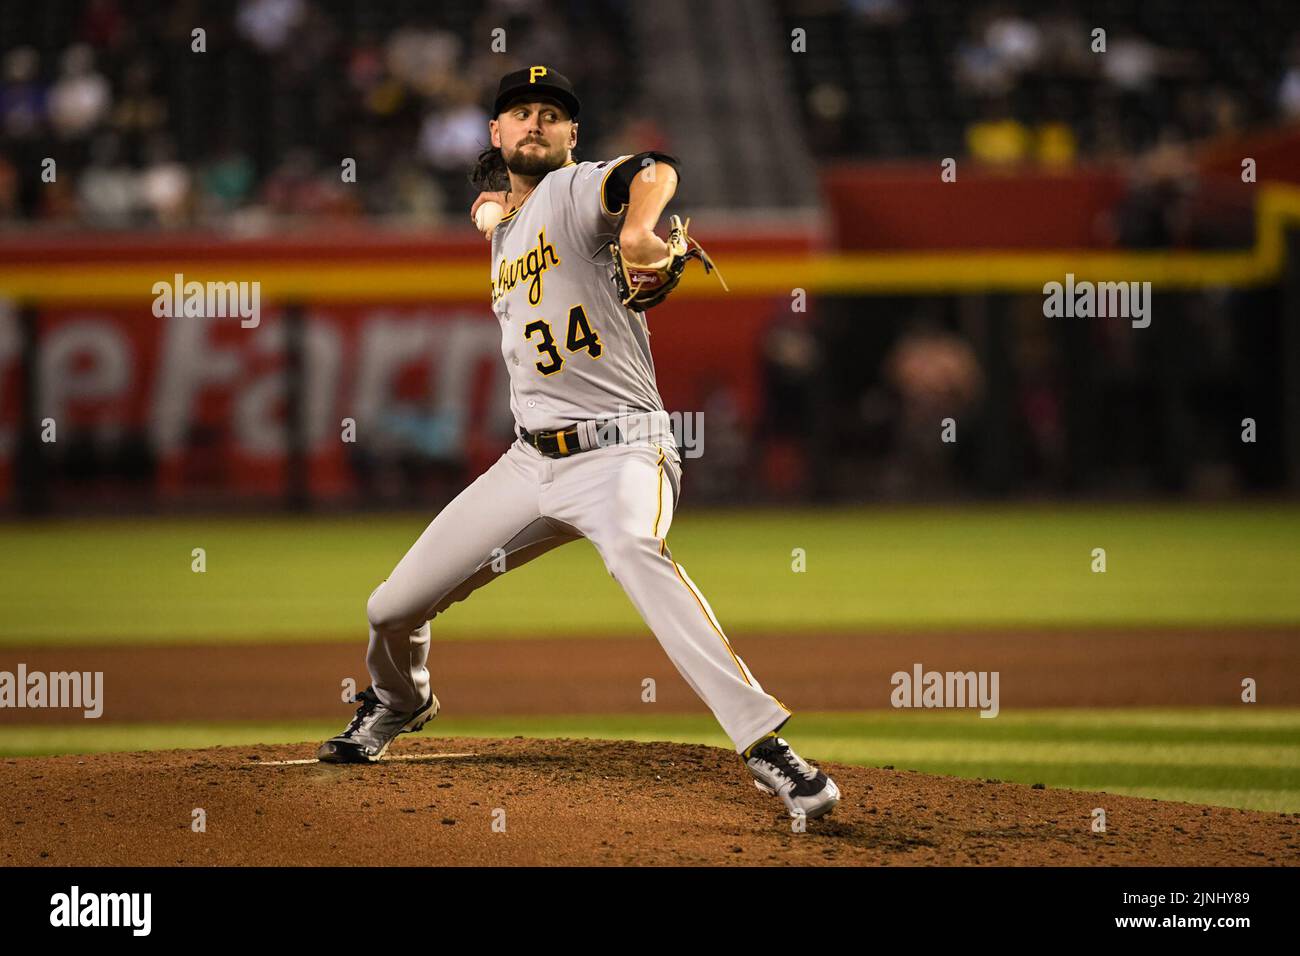 Phoenix, United States. 11th Aug, 2022. Pittsburgh Pirates pitcher JT Brubaker (34) throws against the Arizona Diamondbacks in the fourth inning during an MLB baseball game, Thursday, August 11, 2022, in Phoenix, Arizona. The Diamondbacks defeated the Pirates 9-3. (Thomas Fernandez/Image of Sport) Photo via Credit: Newscom/Alamy Live News Stock Photo